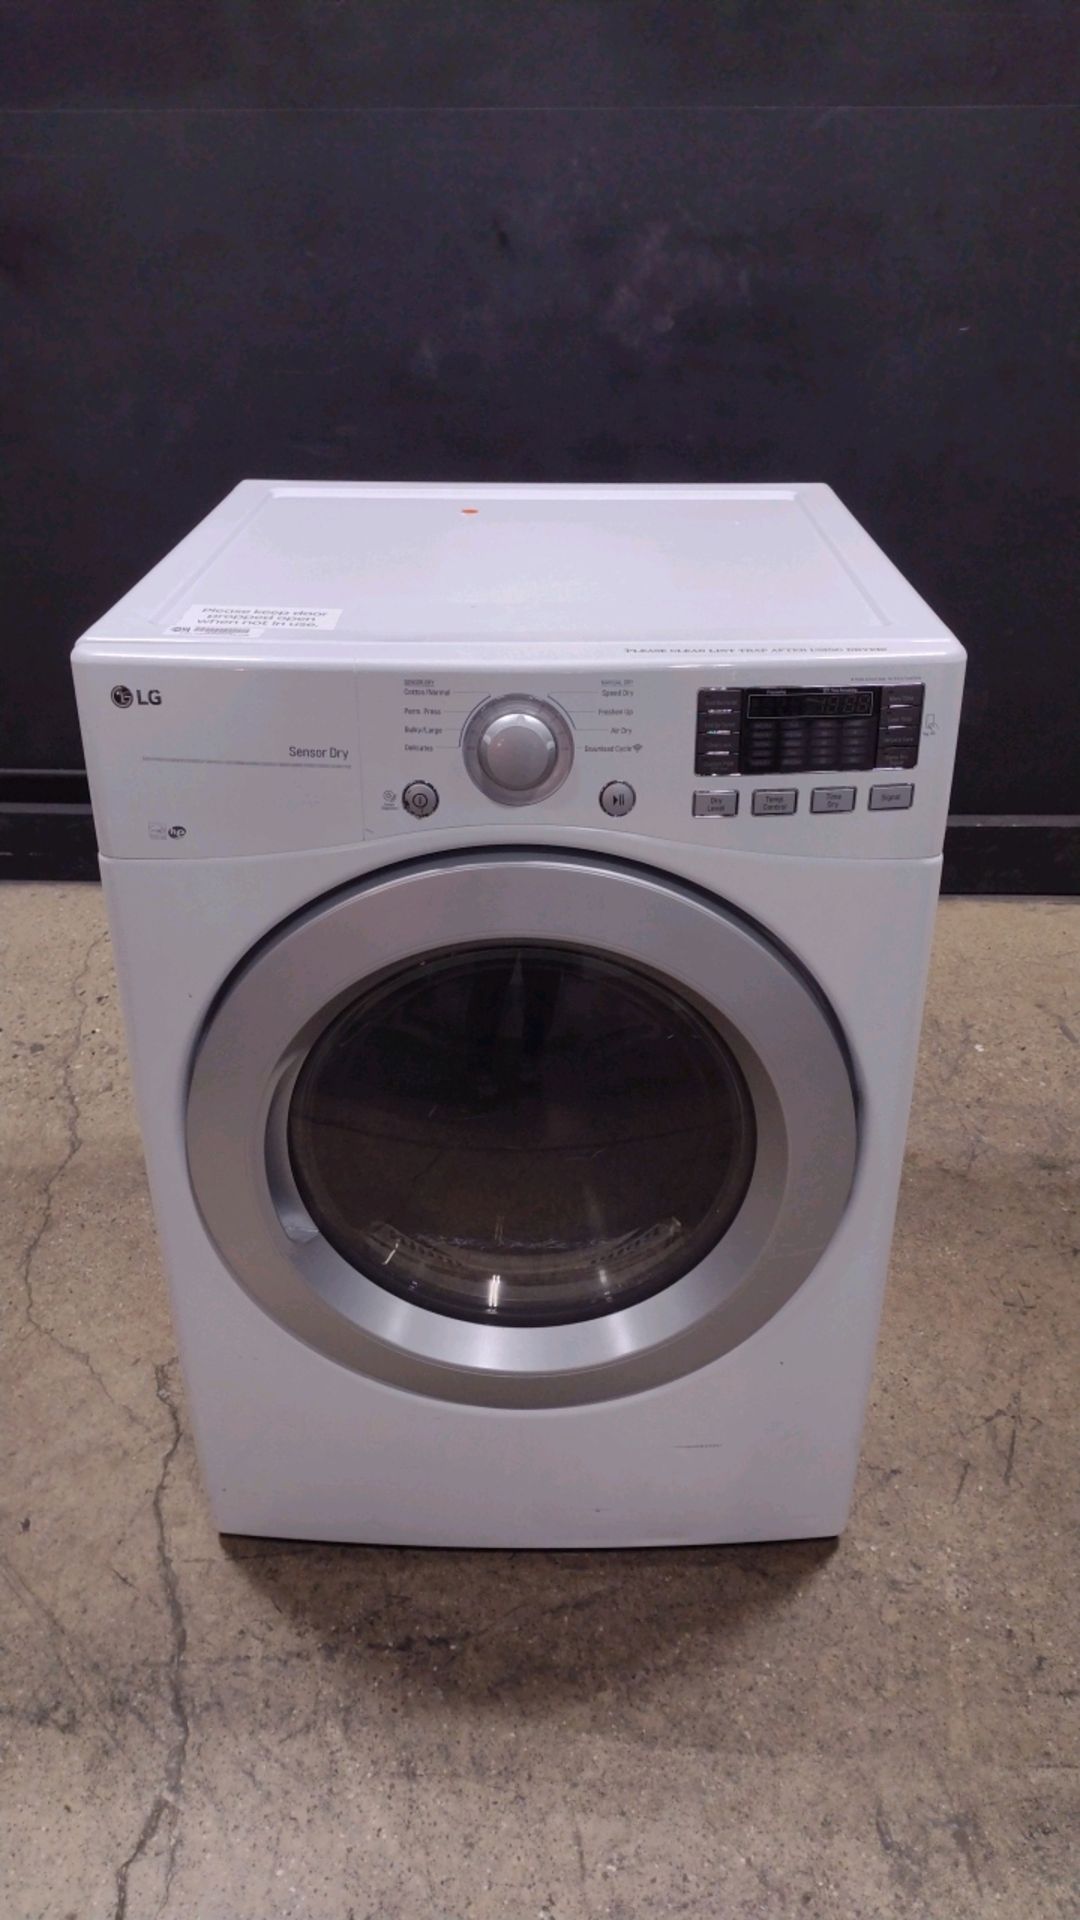 LG DLE3170W DRYER MACHINE (LOCATED AT 3325 MOUNT PROSPECT ROAD, FRANKLIN PARK, IL, 60131)